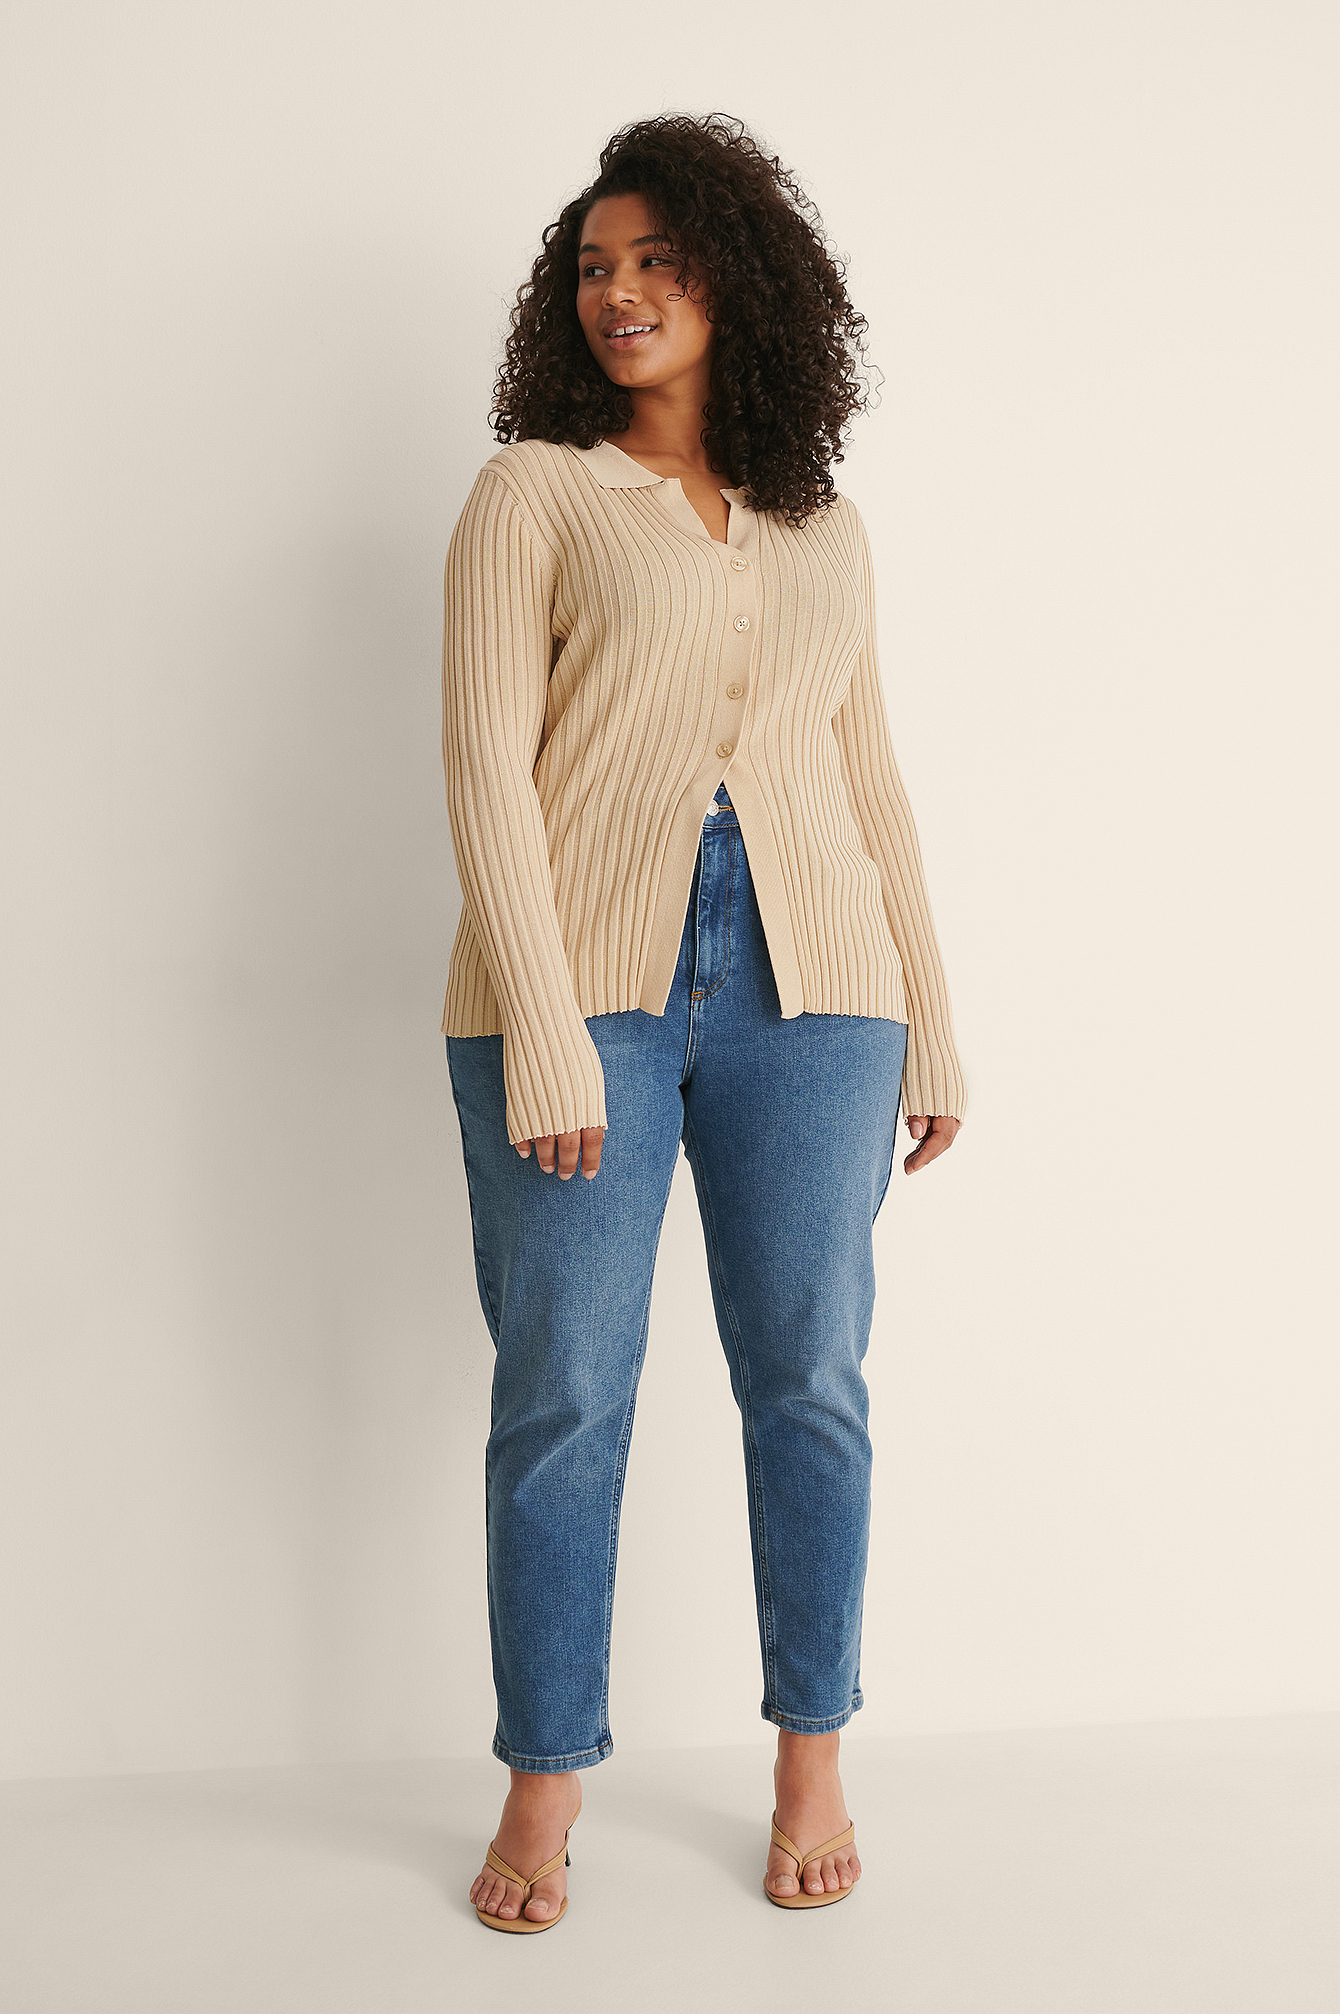 Ribbed Knitted Buttoned Long Sleeve Top Outfit.